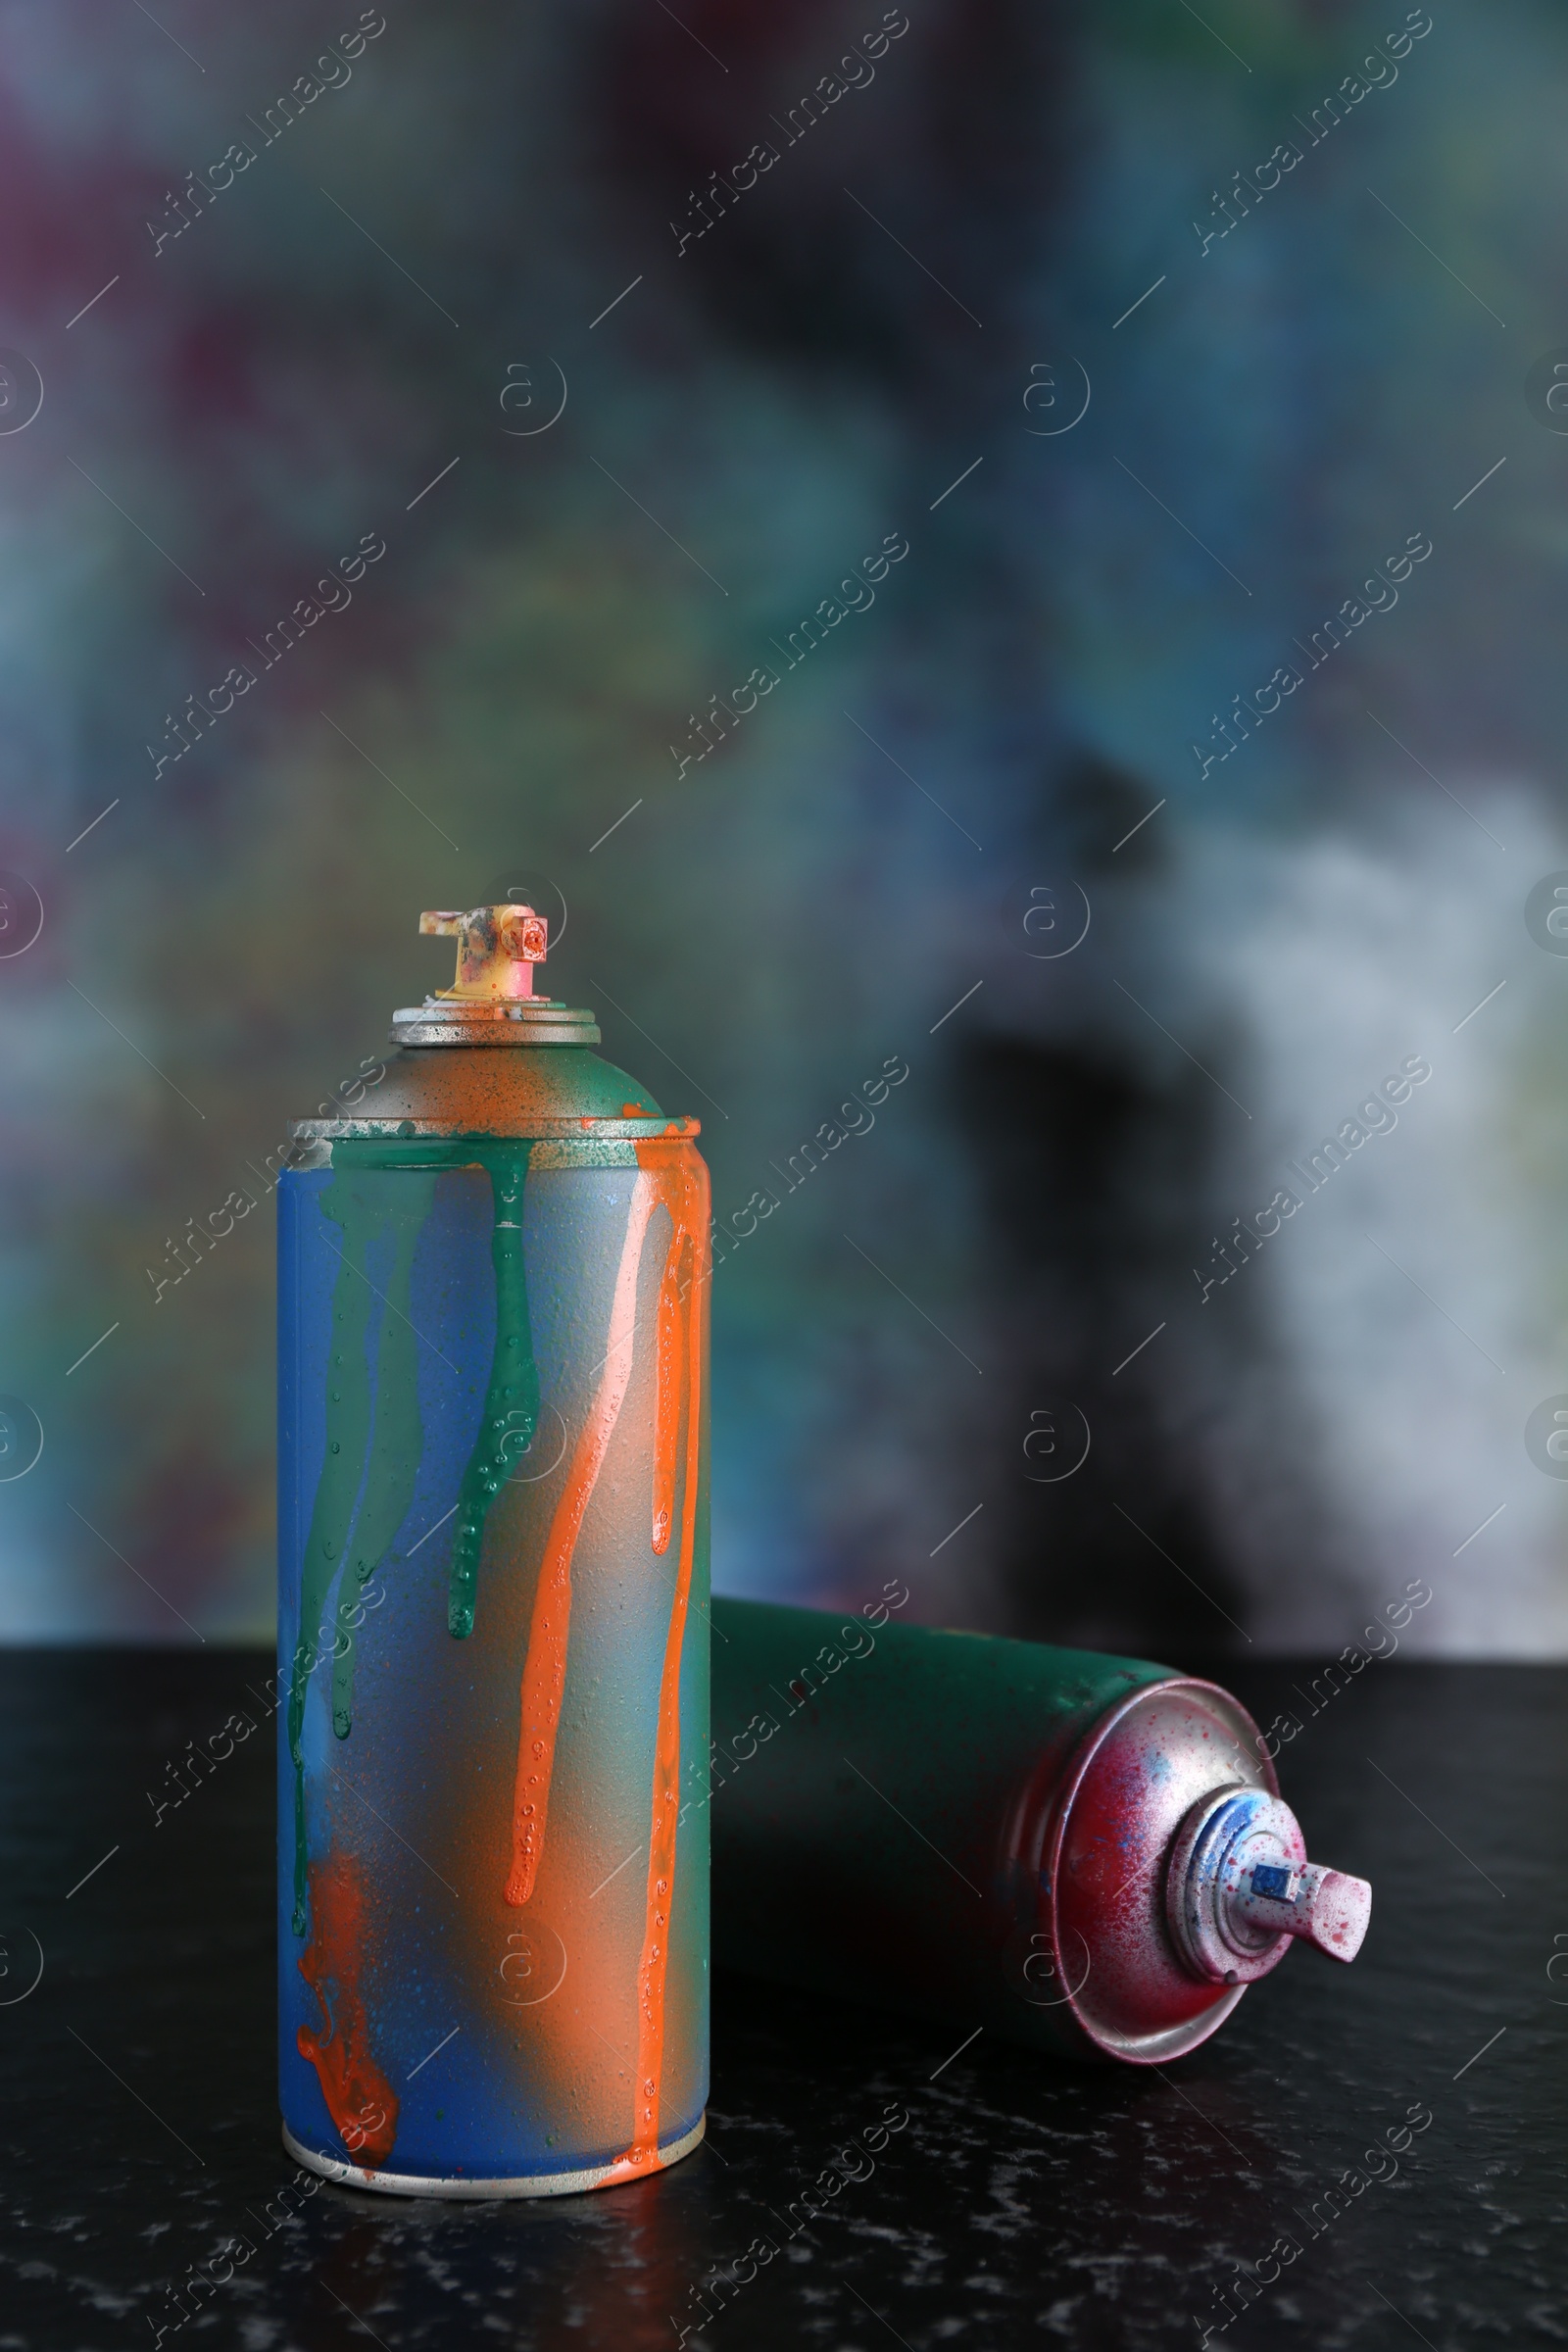 Photo of Two spray paint cans on black textured surface against color background